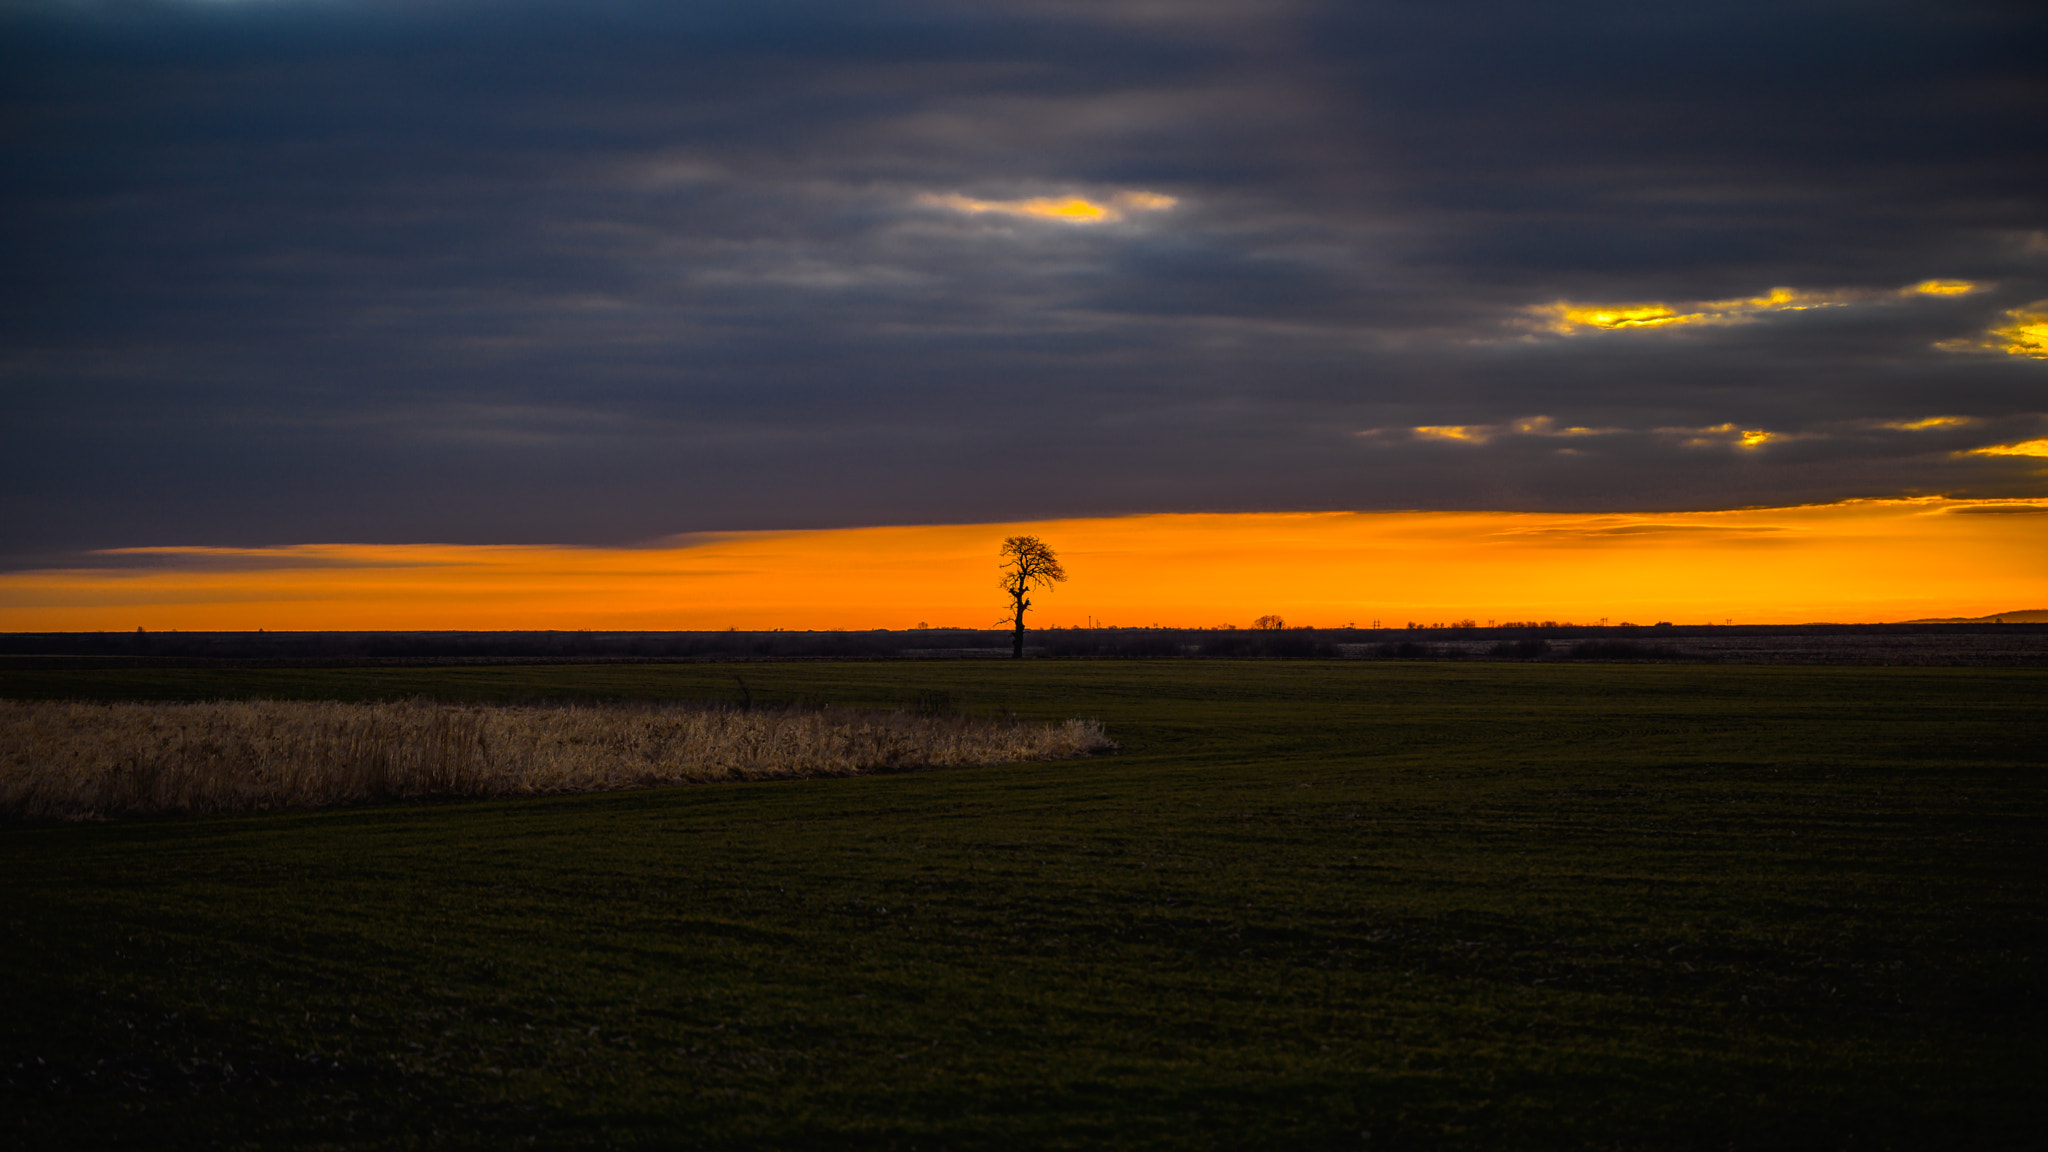 Lonely tree greets the sunrise by Milen Mladenov on 500px.com